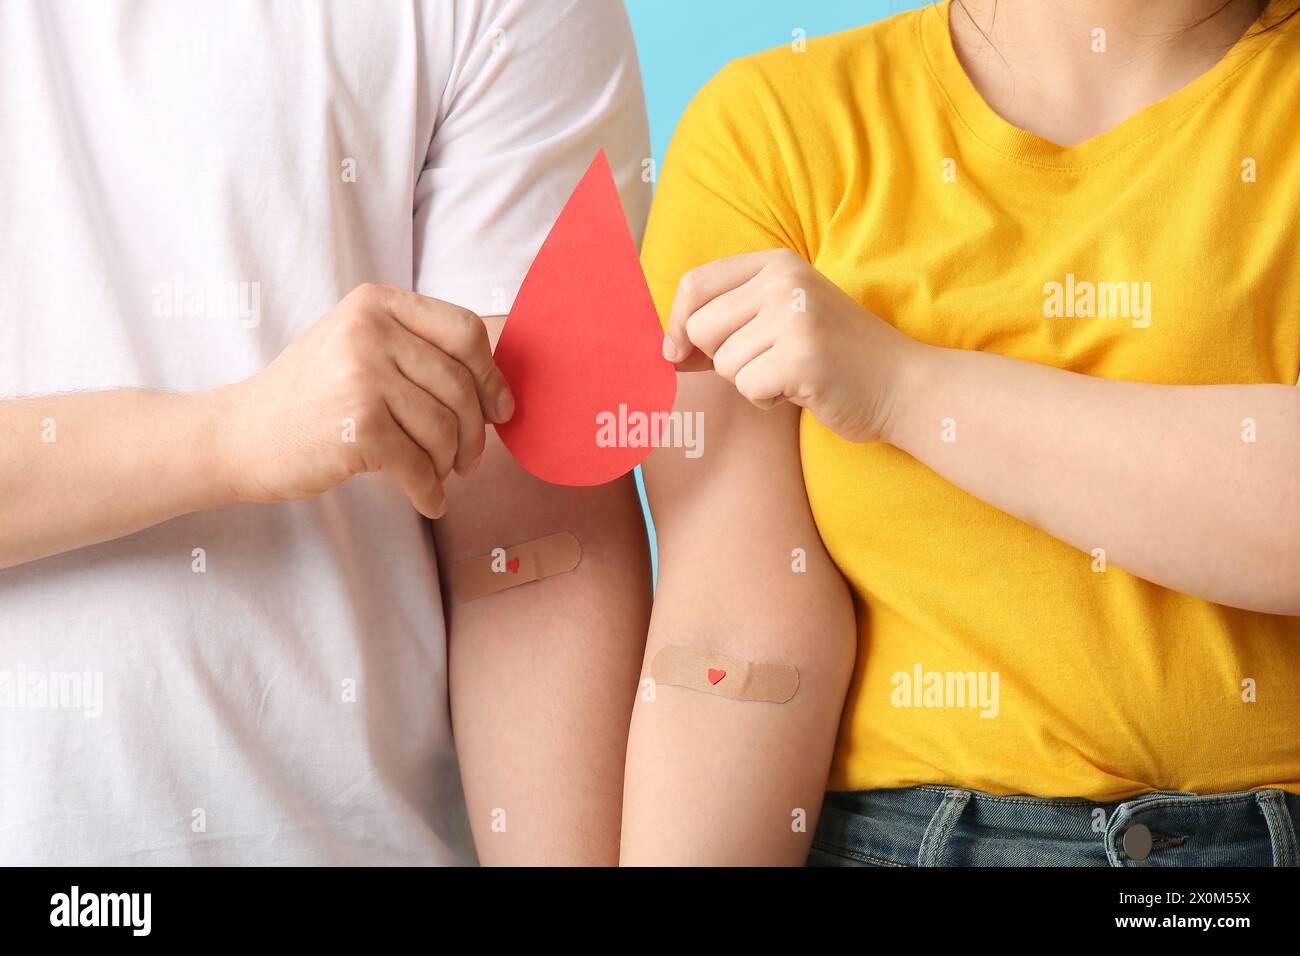 Donors with applied medical patches and paper blood drop on blue background Stock Photo